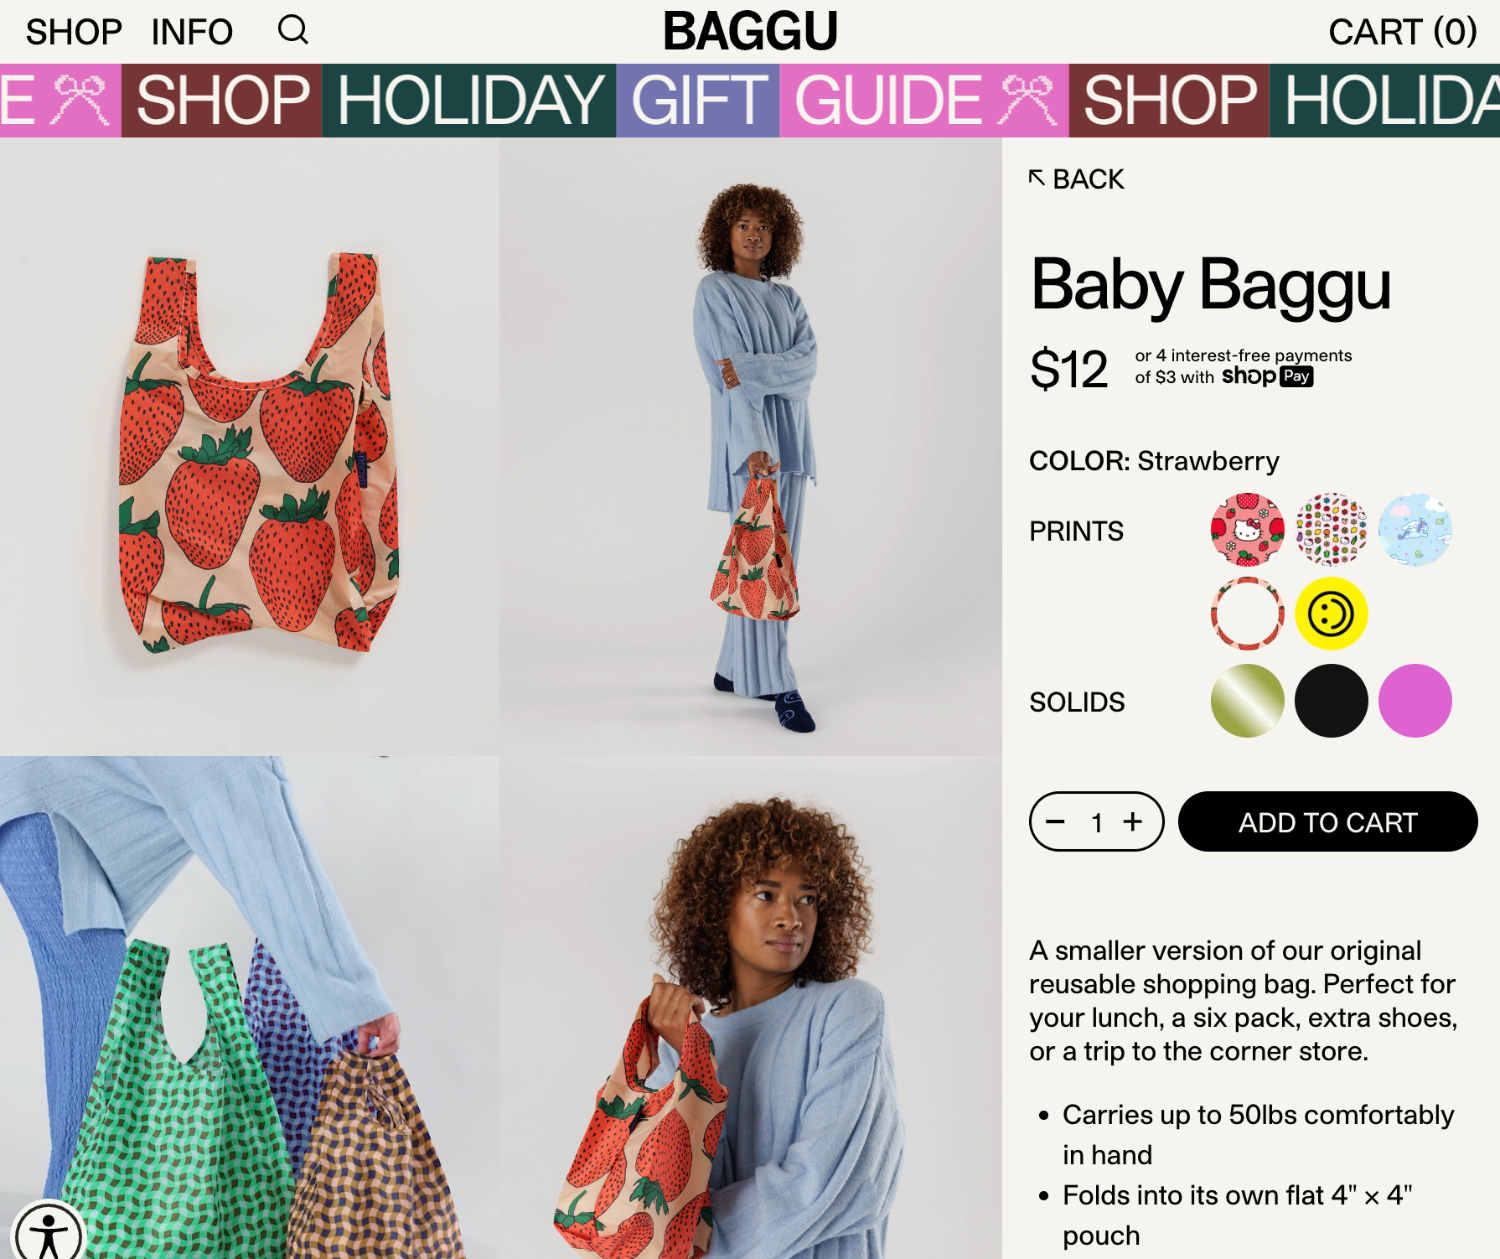 Ecommerce website page for Baggu